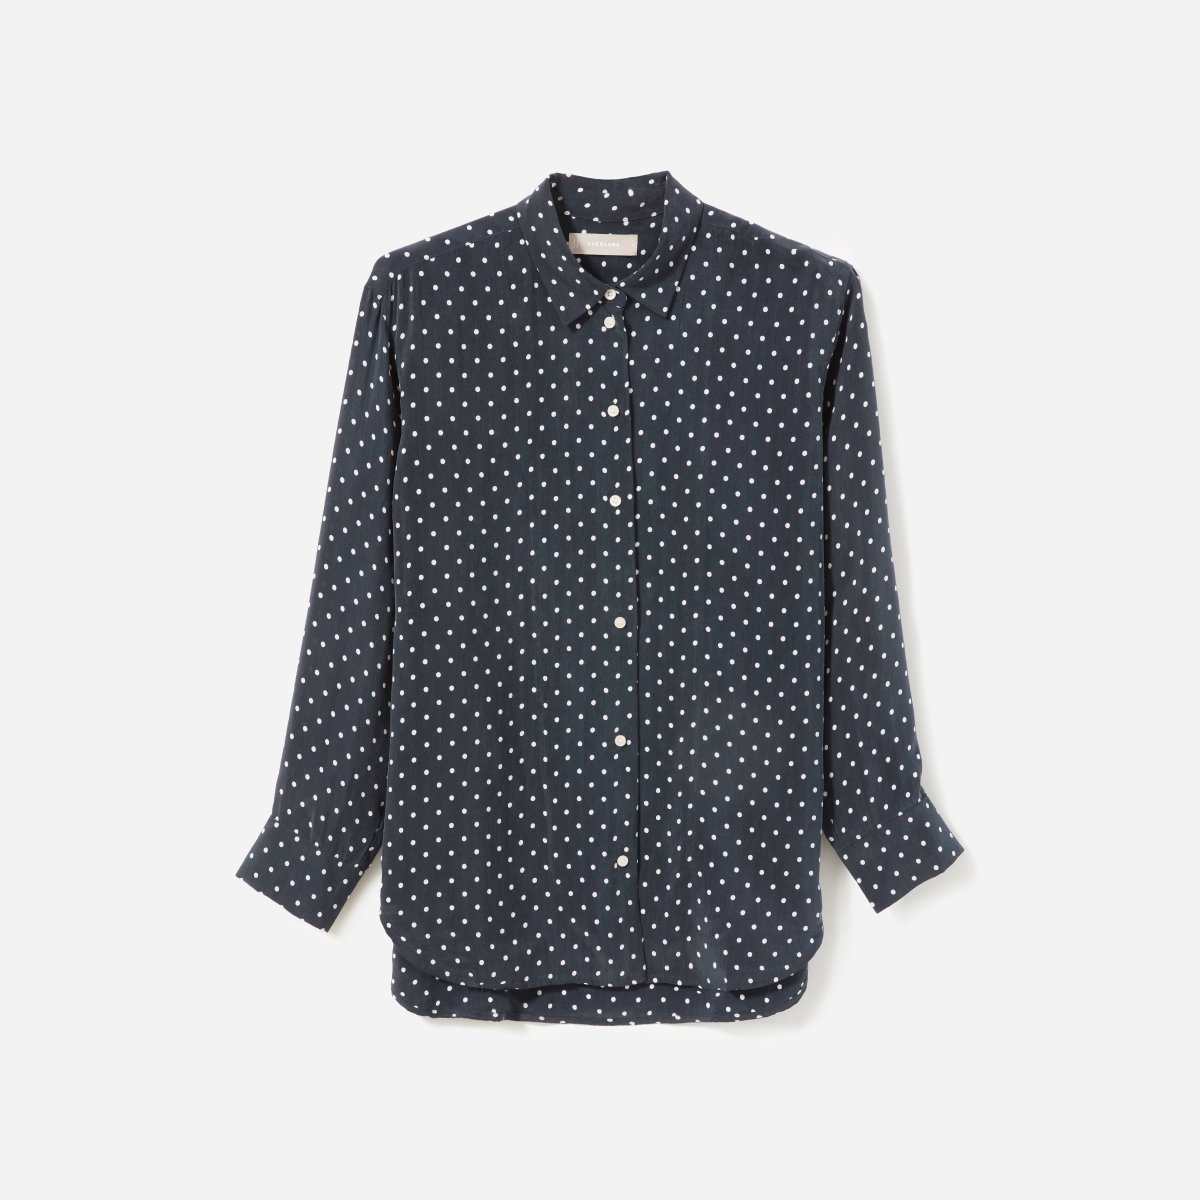 a navy button up shirt with white polka dots